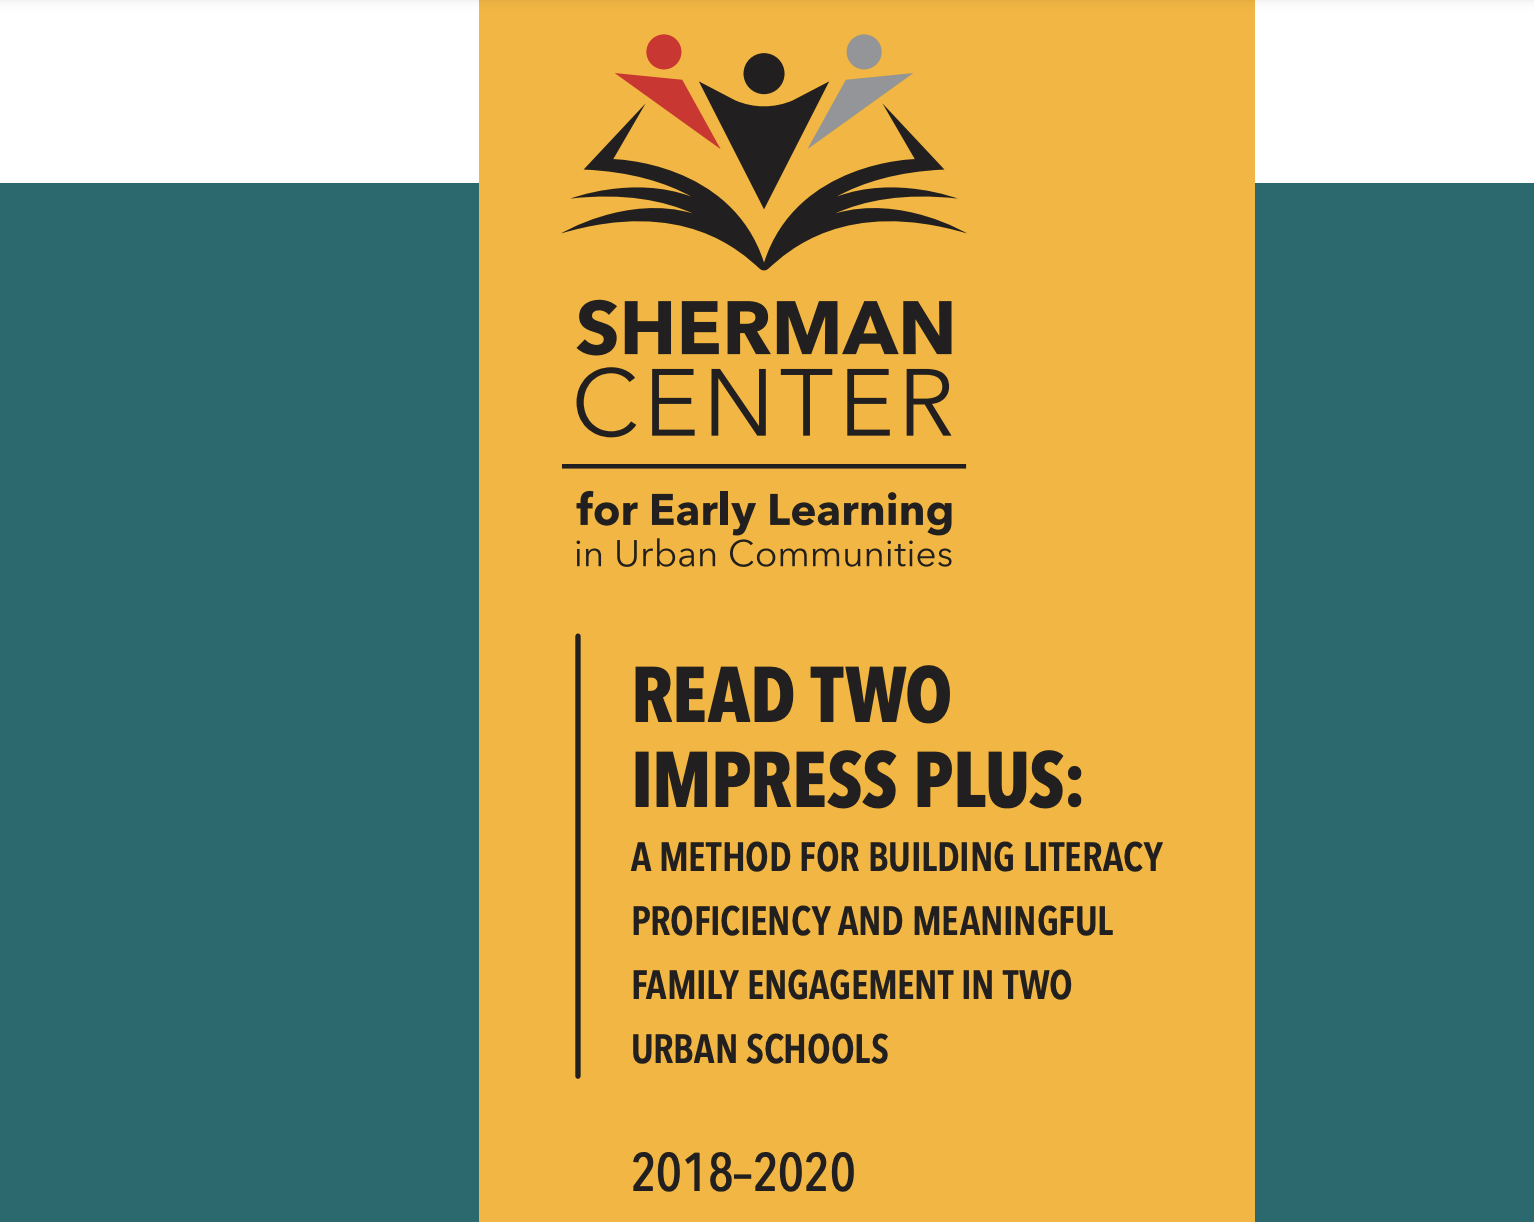 Sherman Center releases new research report on Read Two Impress Plus